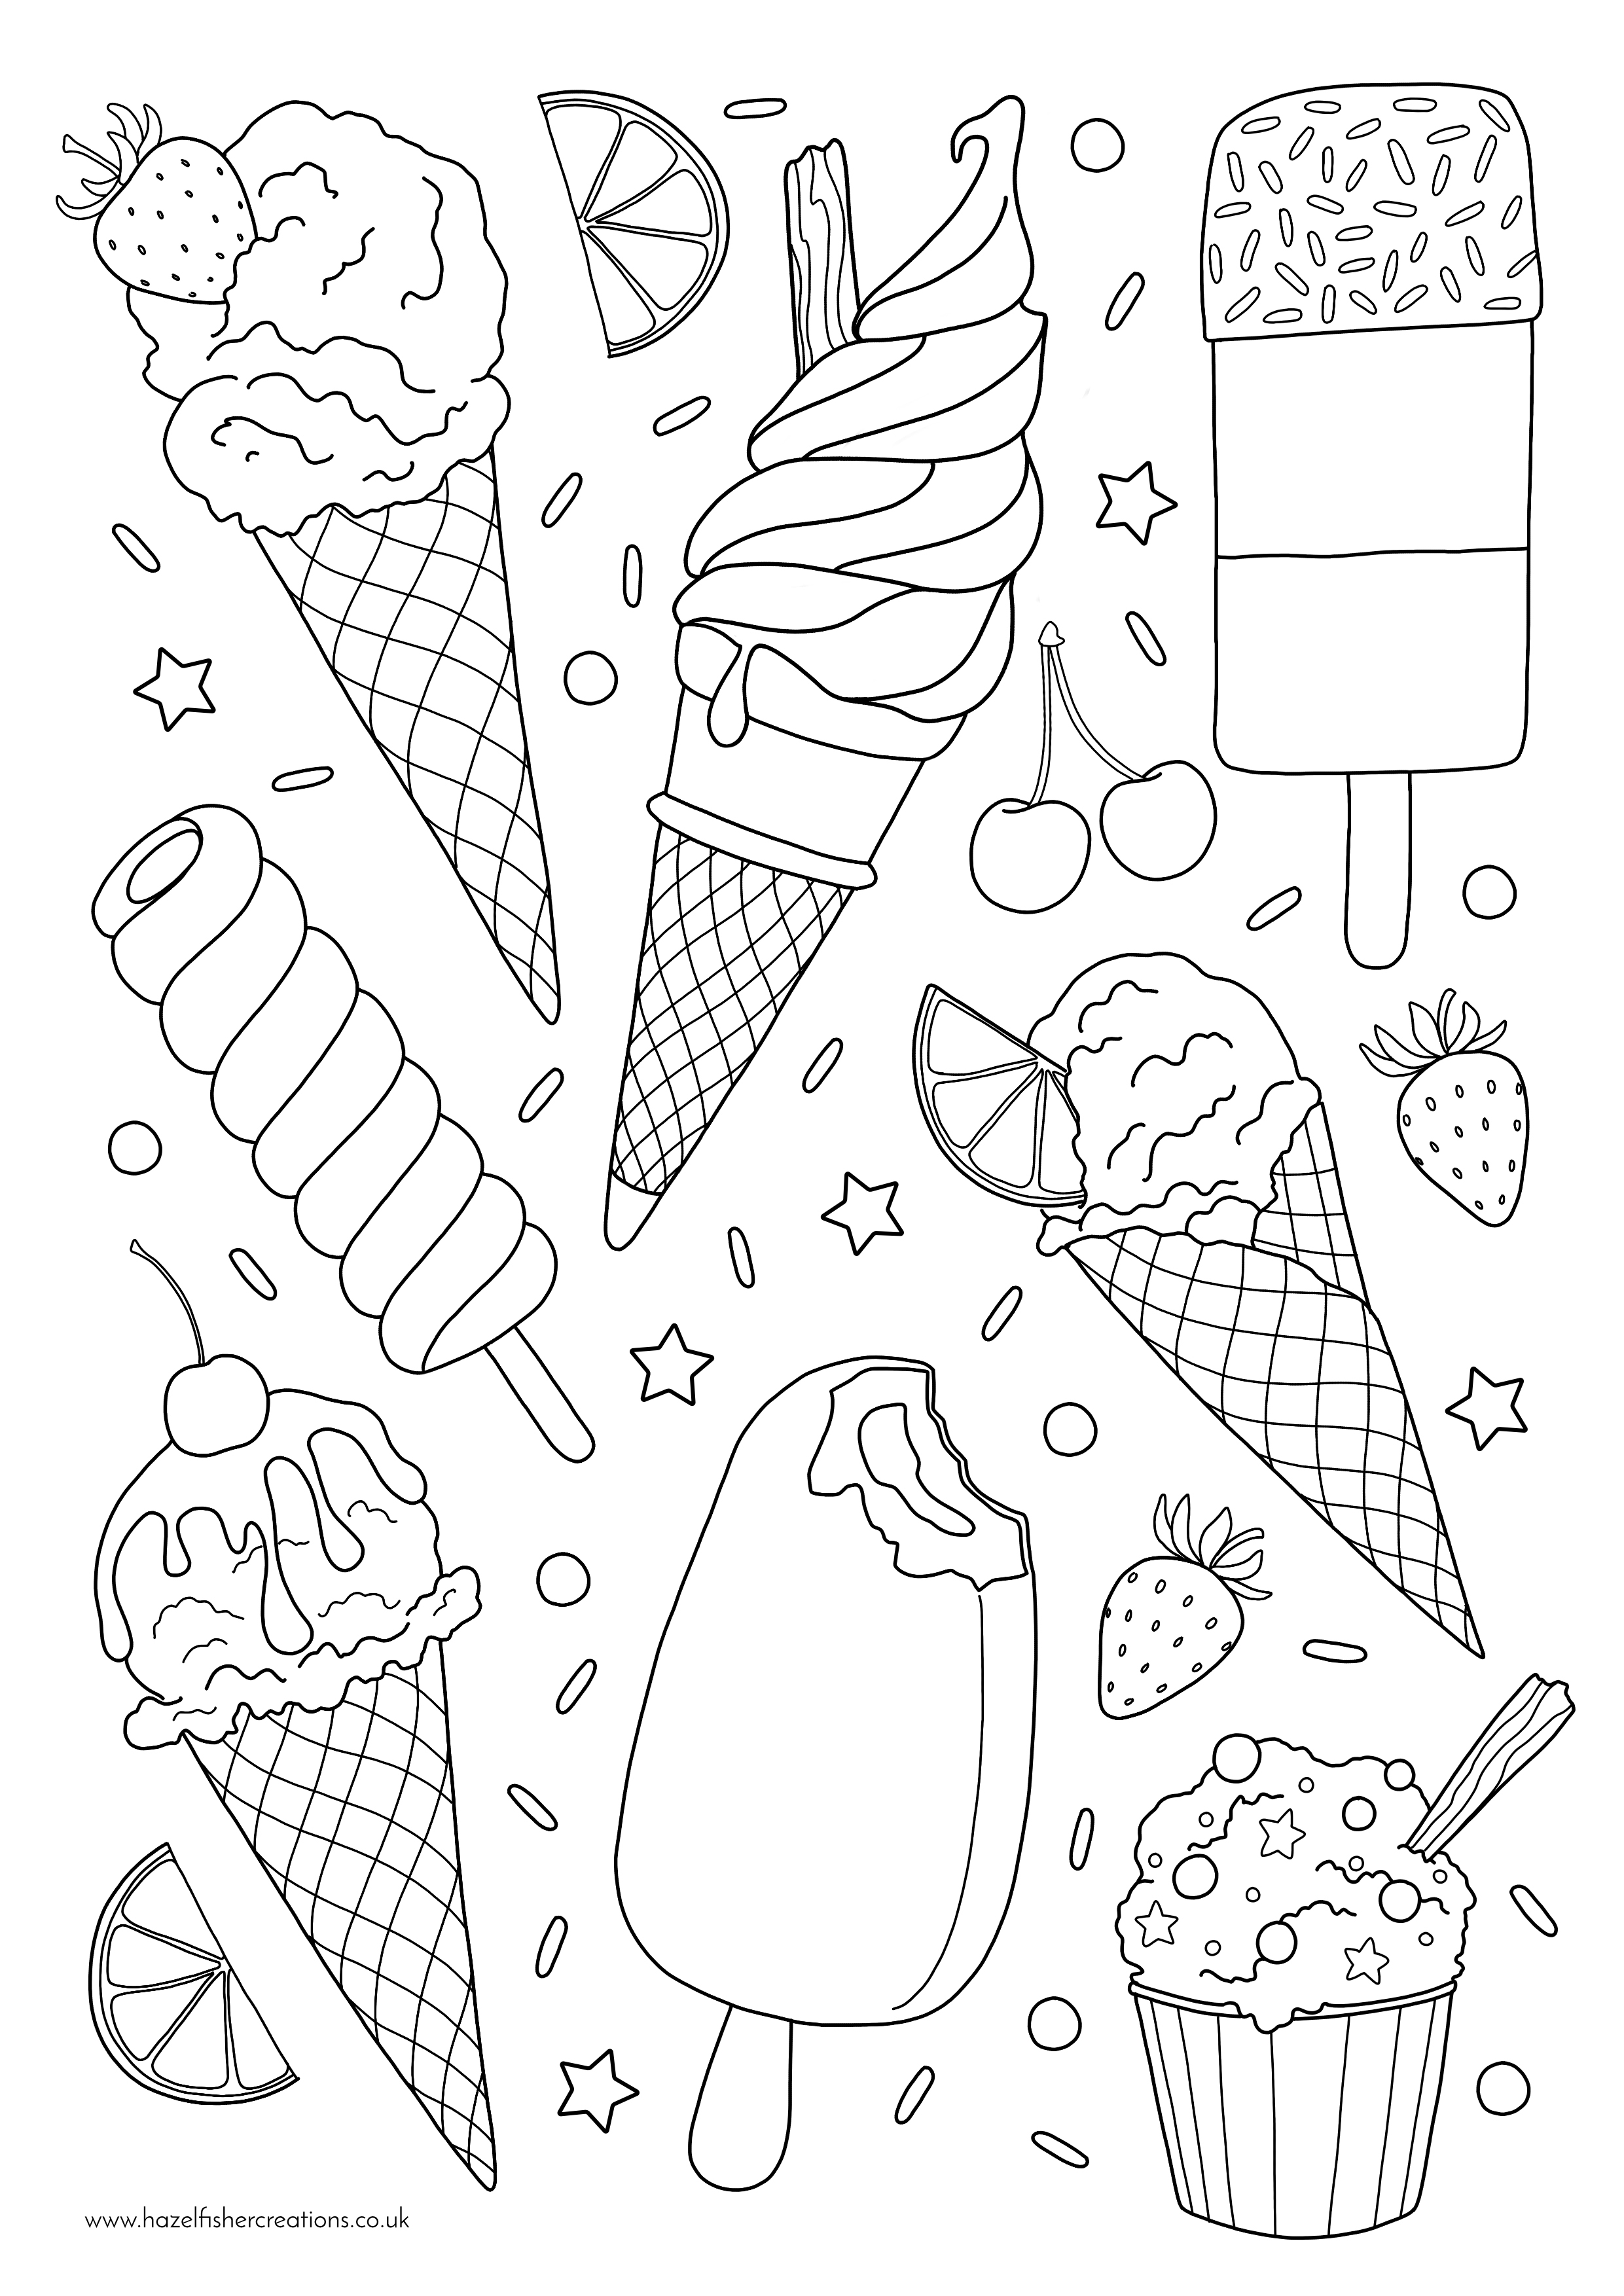 Ice Cream Colouring In Activity Sheet - Printables